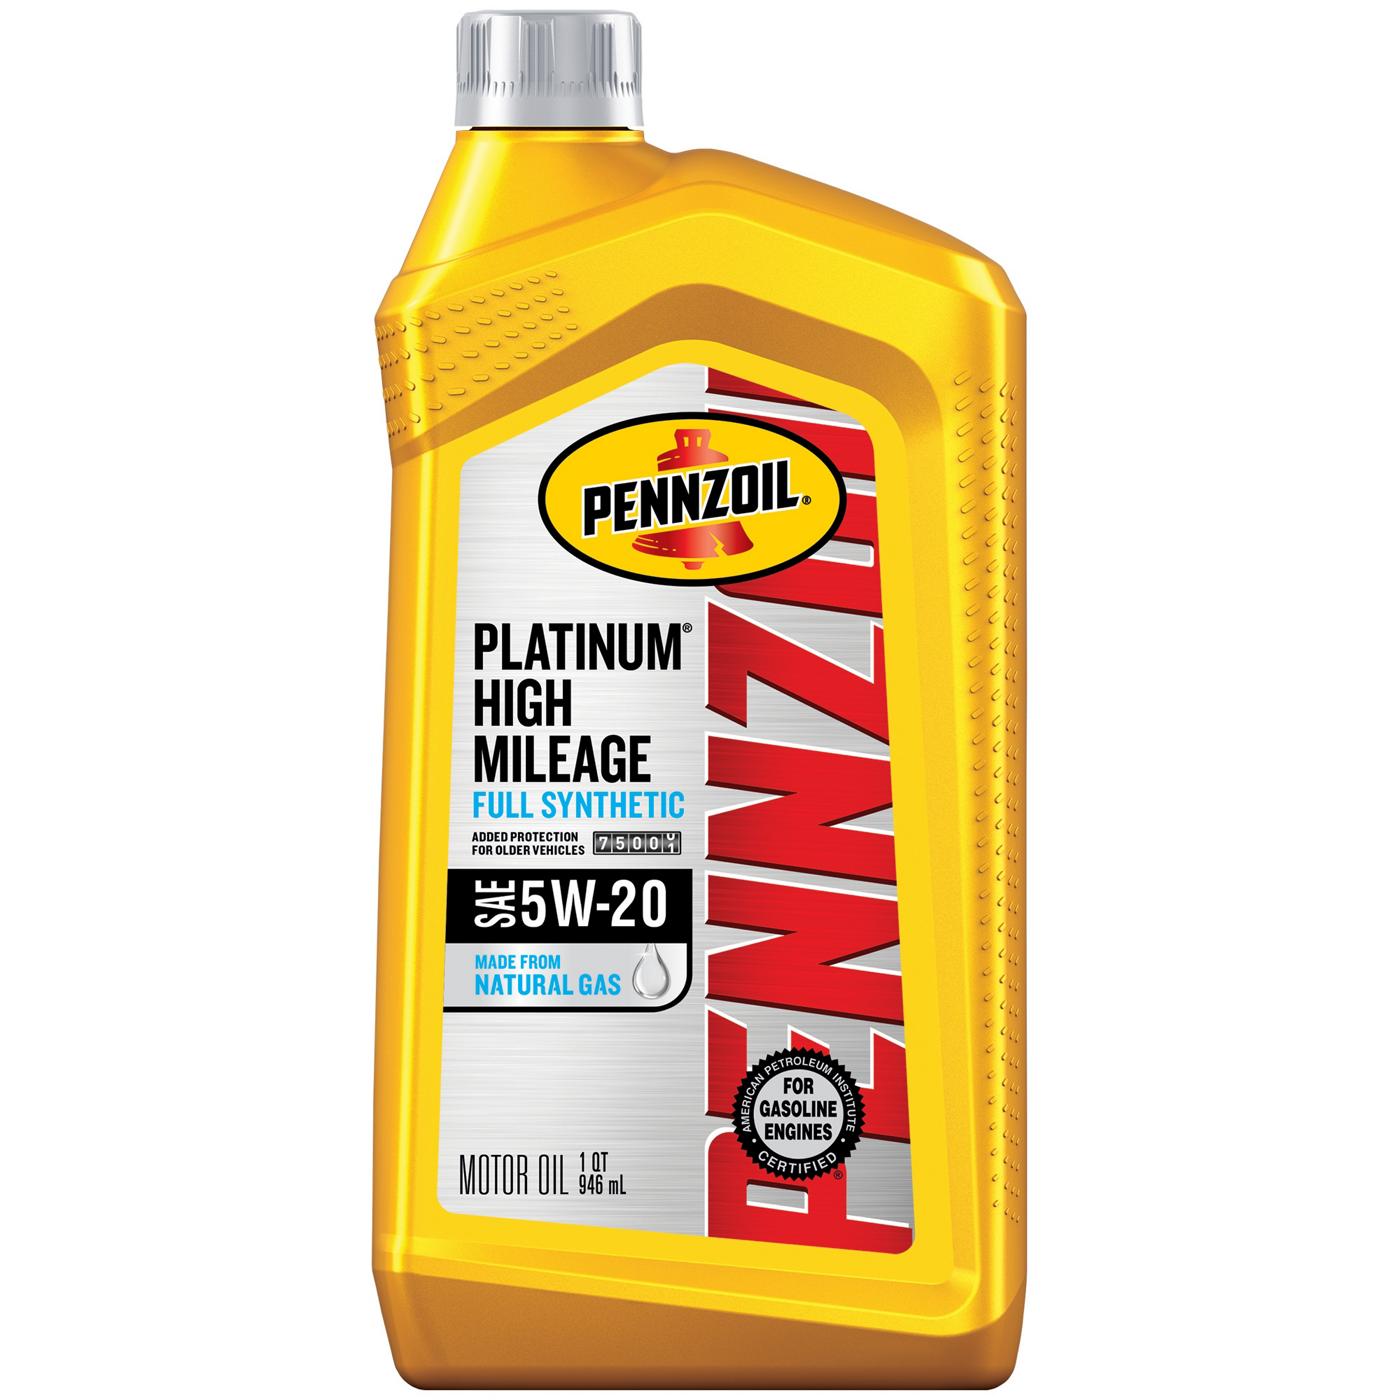 Pennzoil 5W-20 Platinum High Mileage Full Synthetic Motor Oil; image 1 of 2